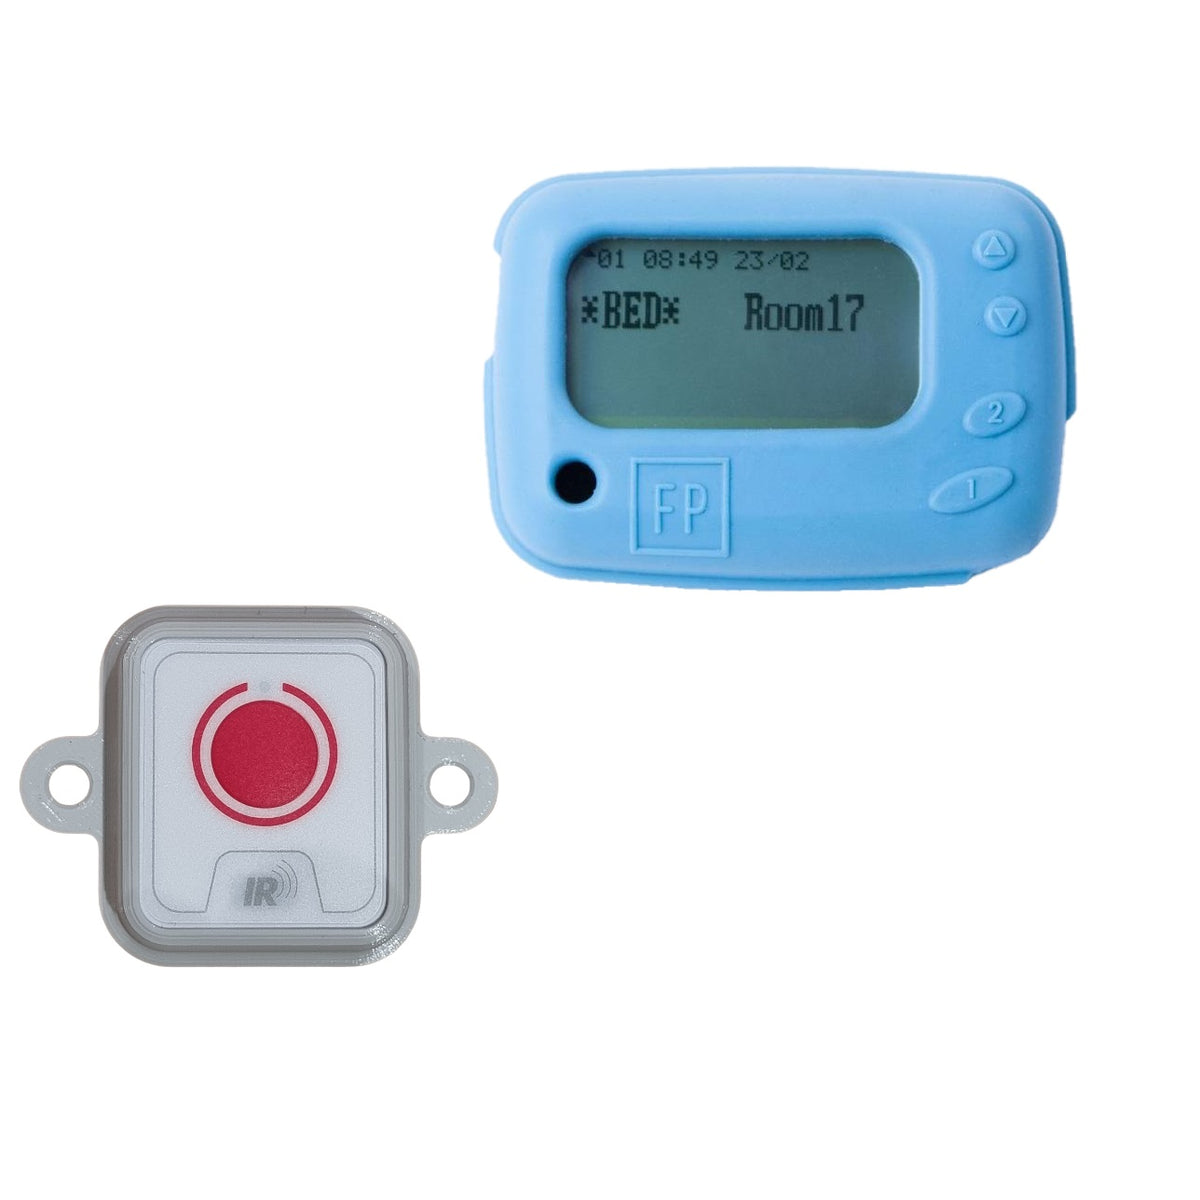 Wireless Paging System product photo showcasing a blue electronic device alongside a smaller device with a red button